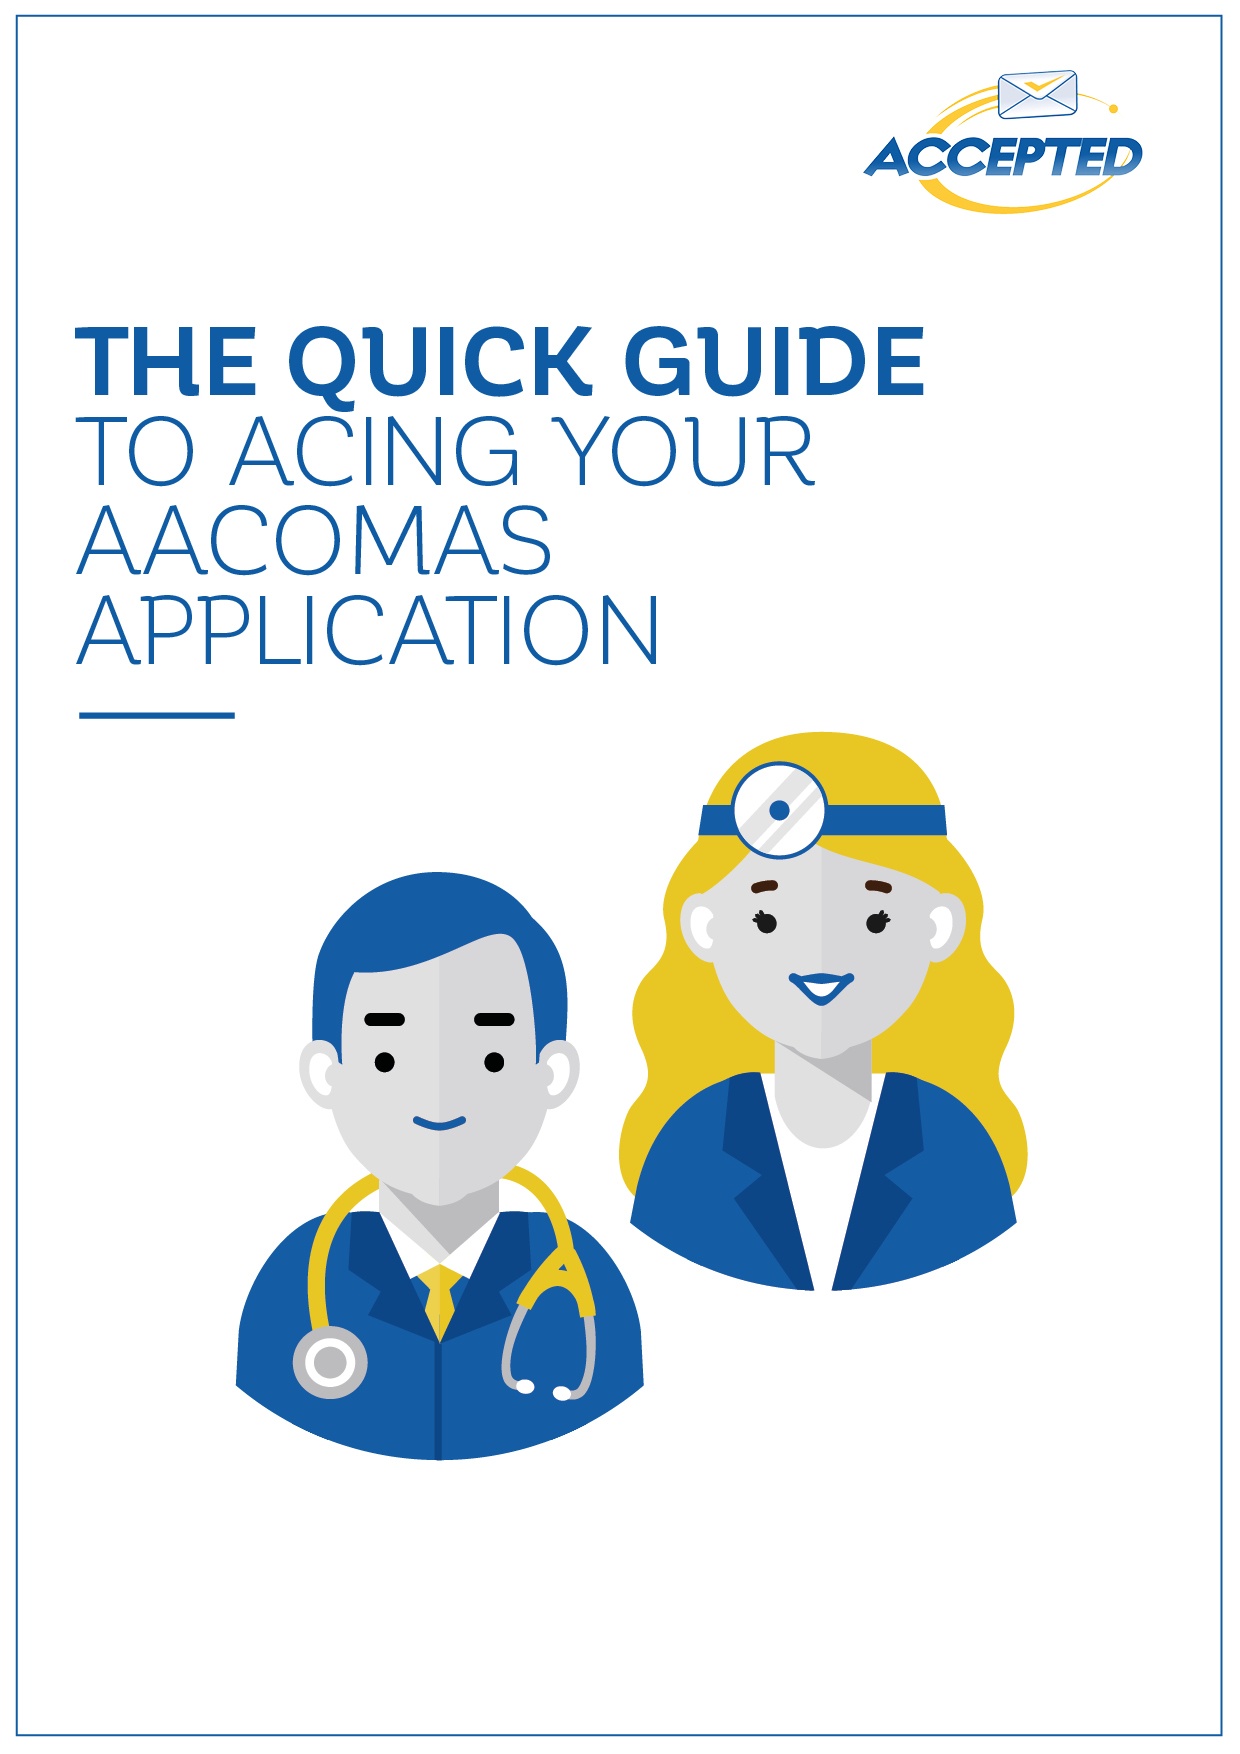 The Quick Guide to Acing Your AACOMAS Application